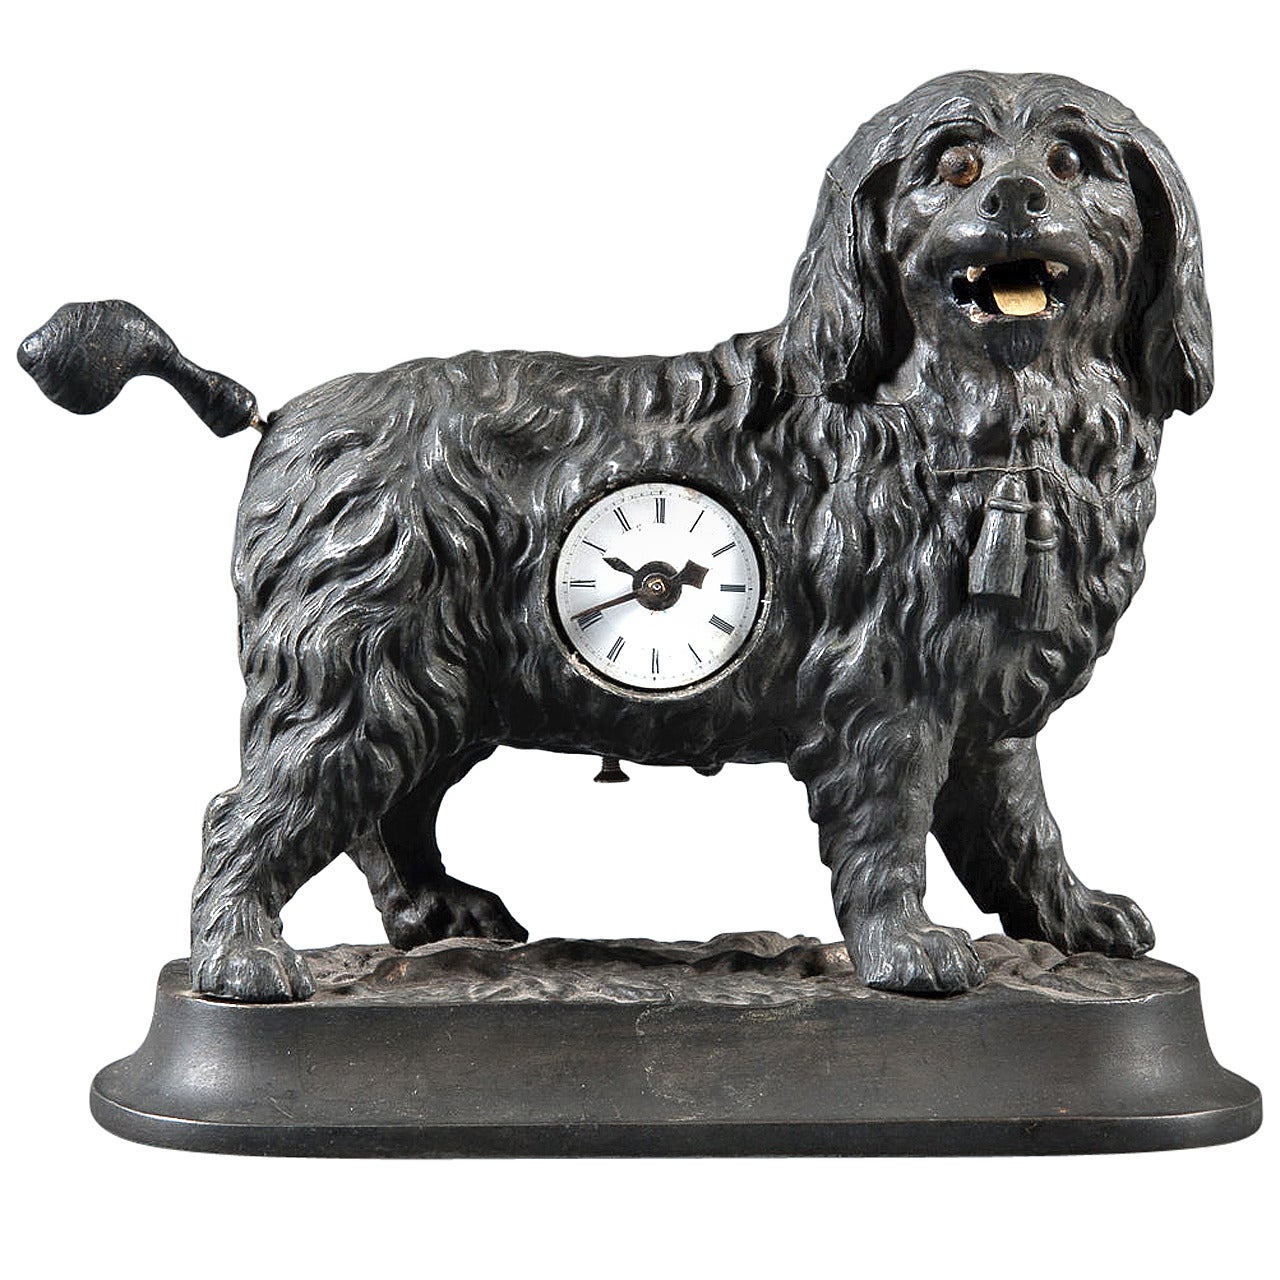 A Rare 19th Century German Cast Iron Animated Dog Novelty Timepiece For Sale